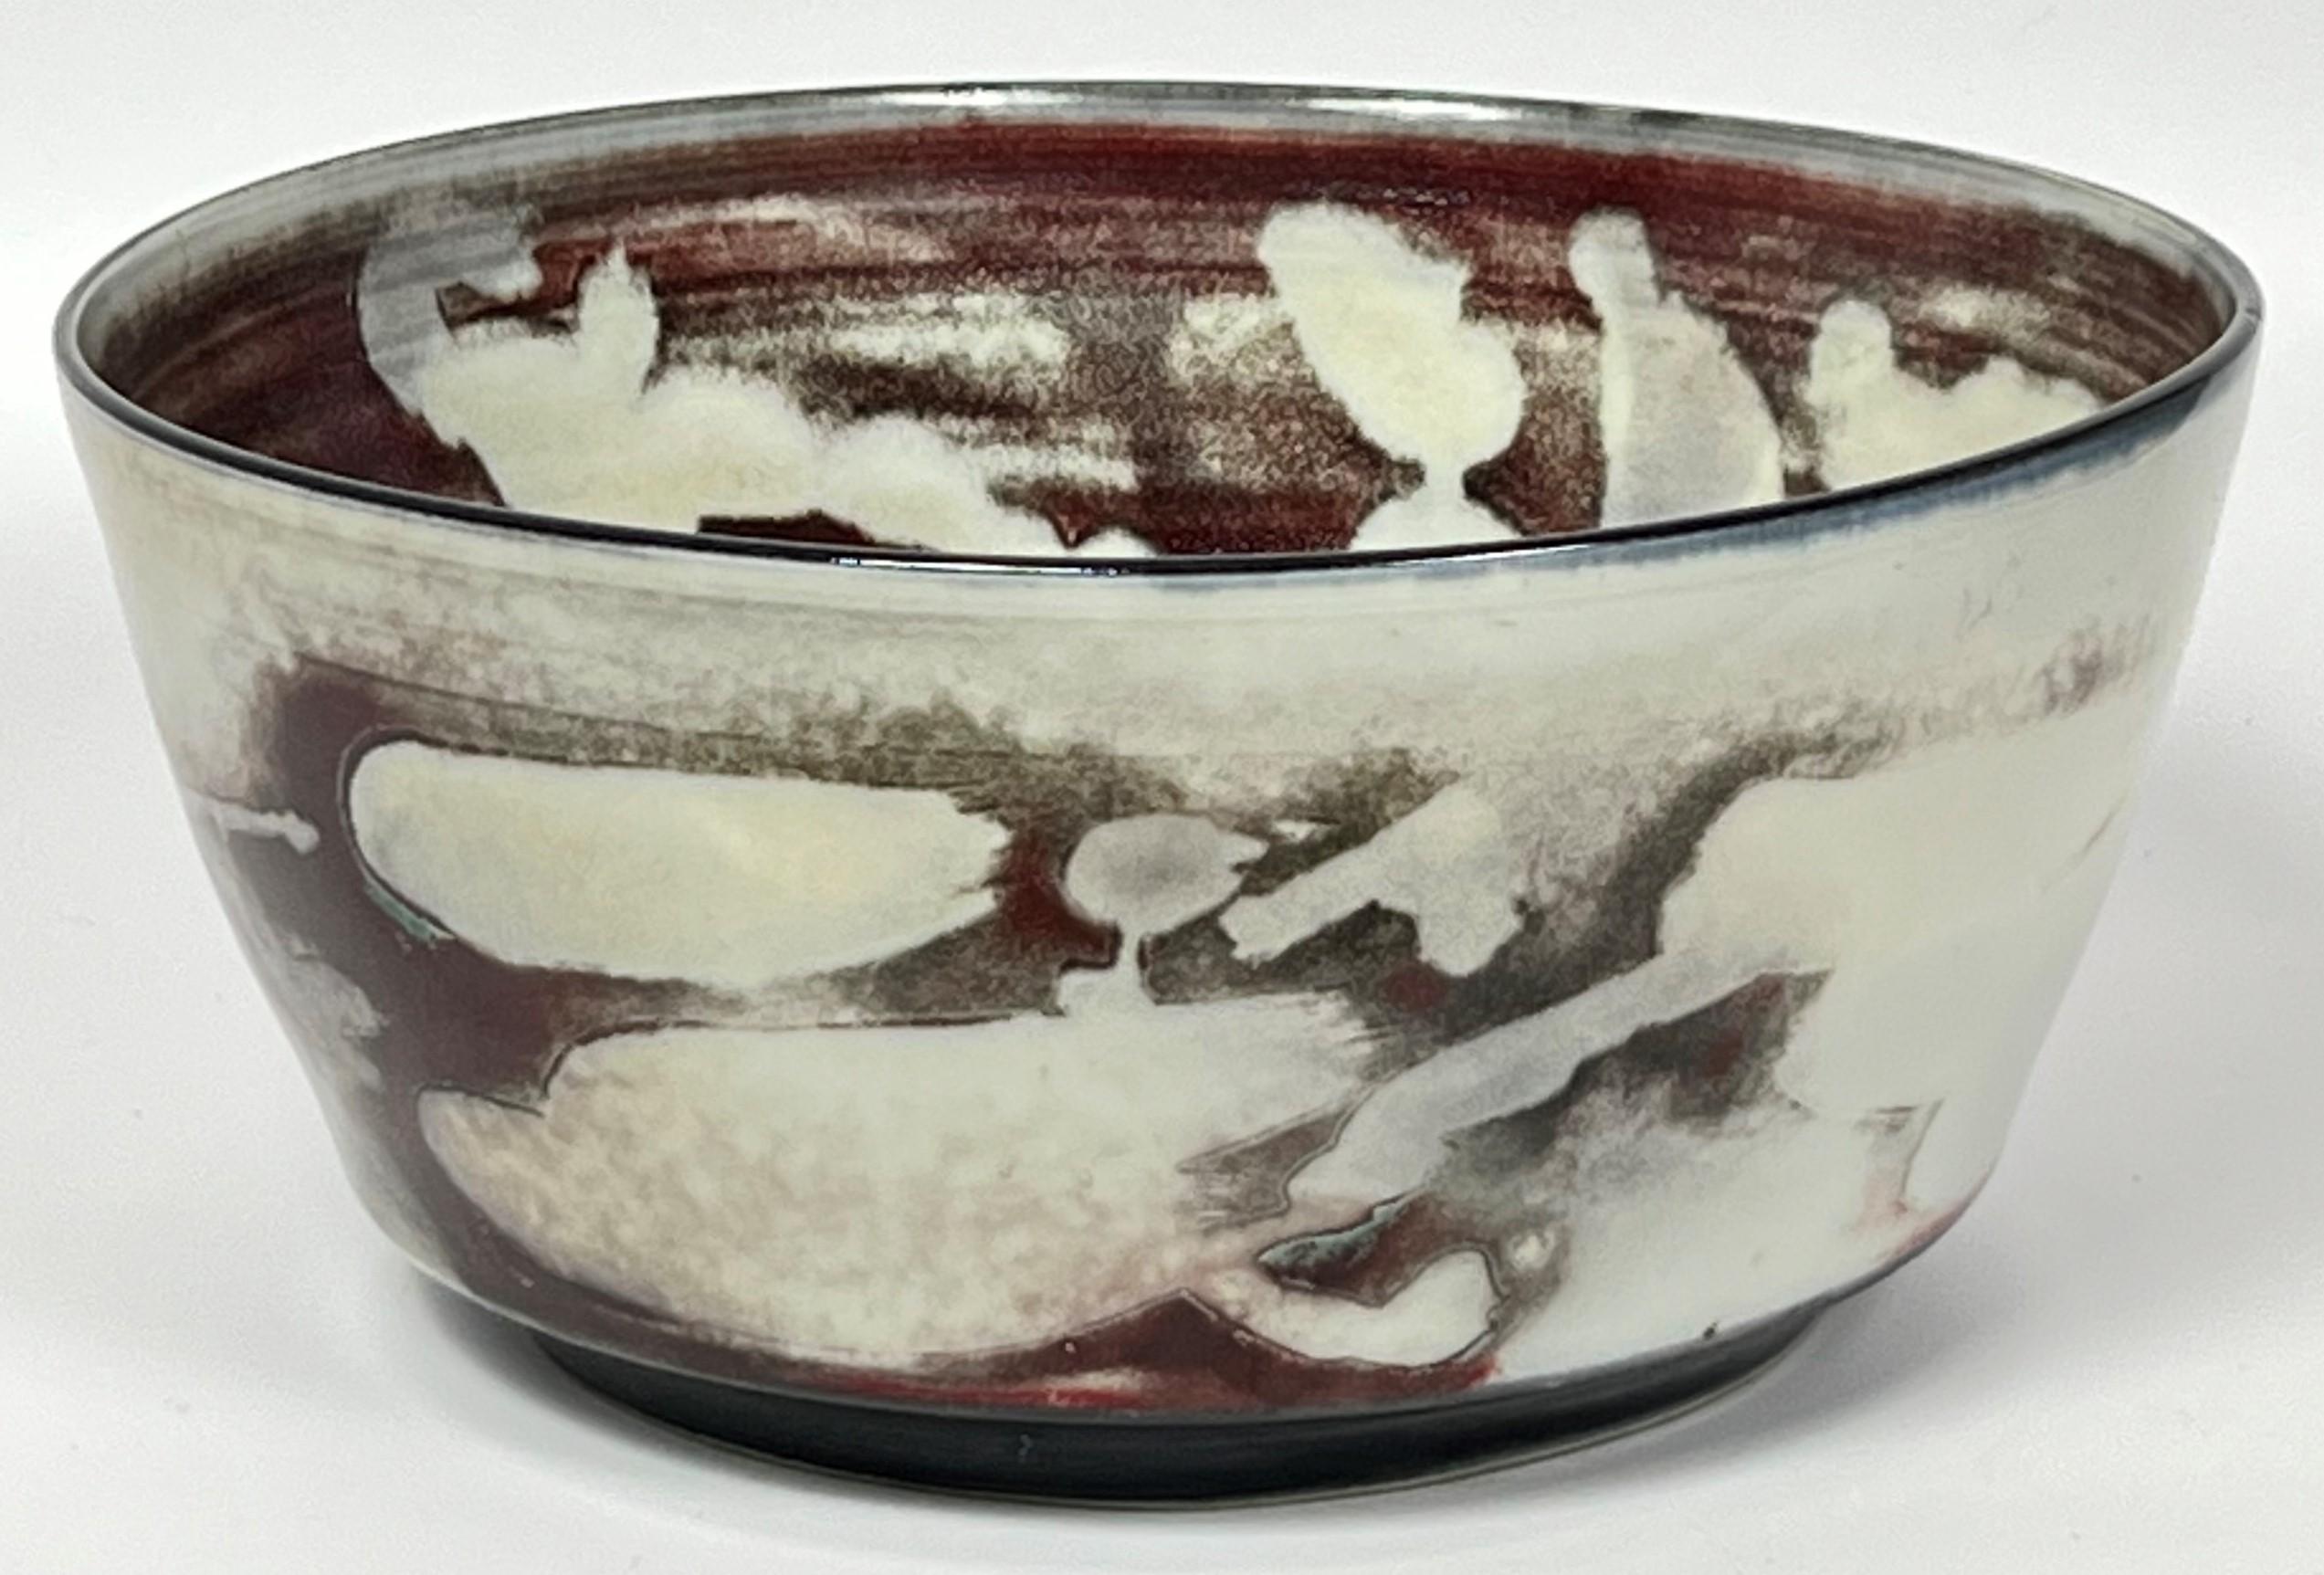 Carl Harry Stalhane opened Designhuset in Sweden in 1973 after decades as as an important artist at Rorstrand. This hand thrown and hand decorated porcelain bowl features a copper reduction glaze that is particularly elusive at high temperatures.